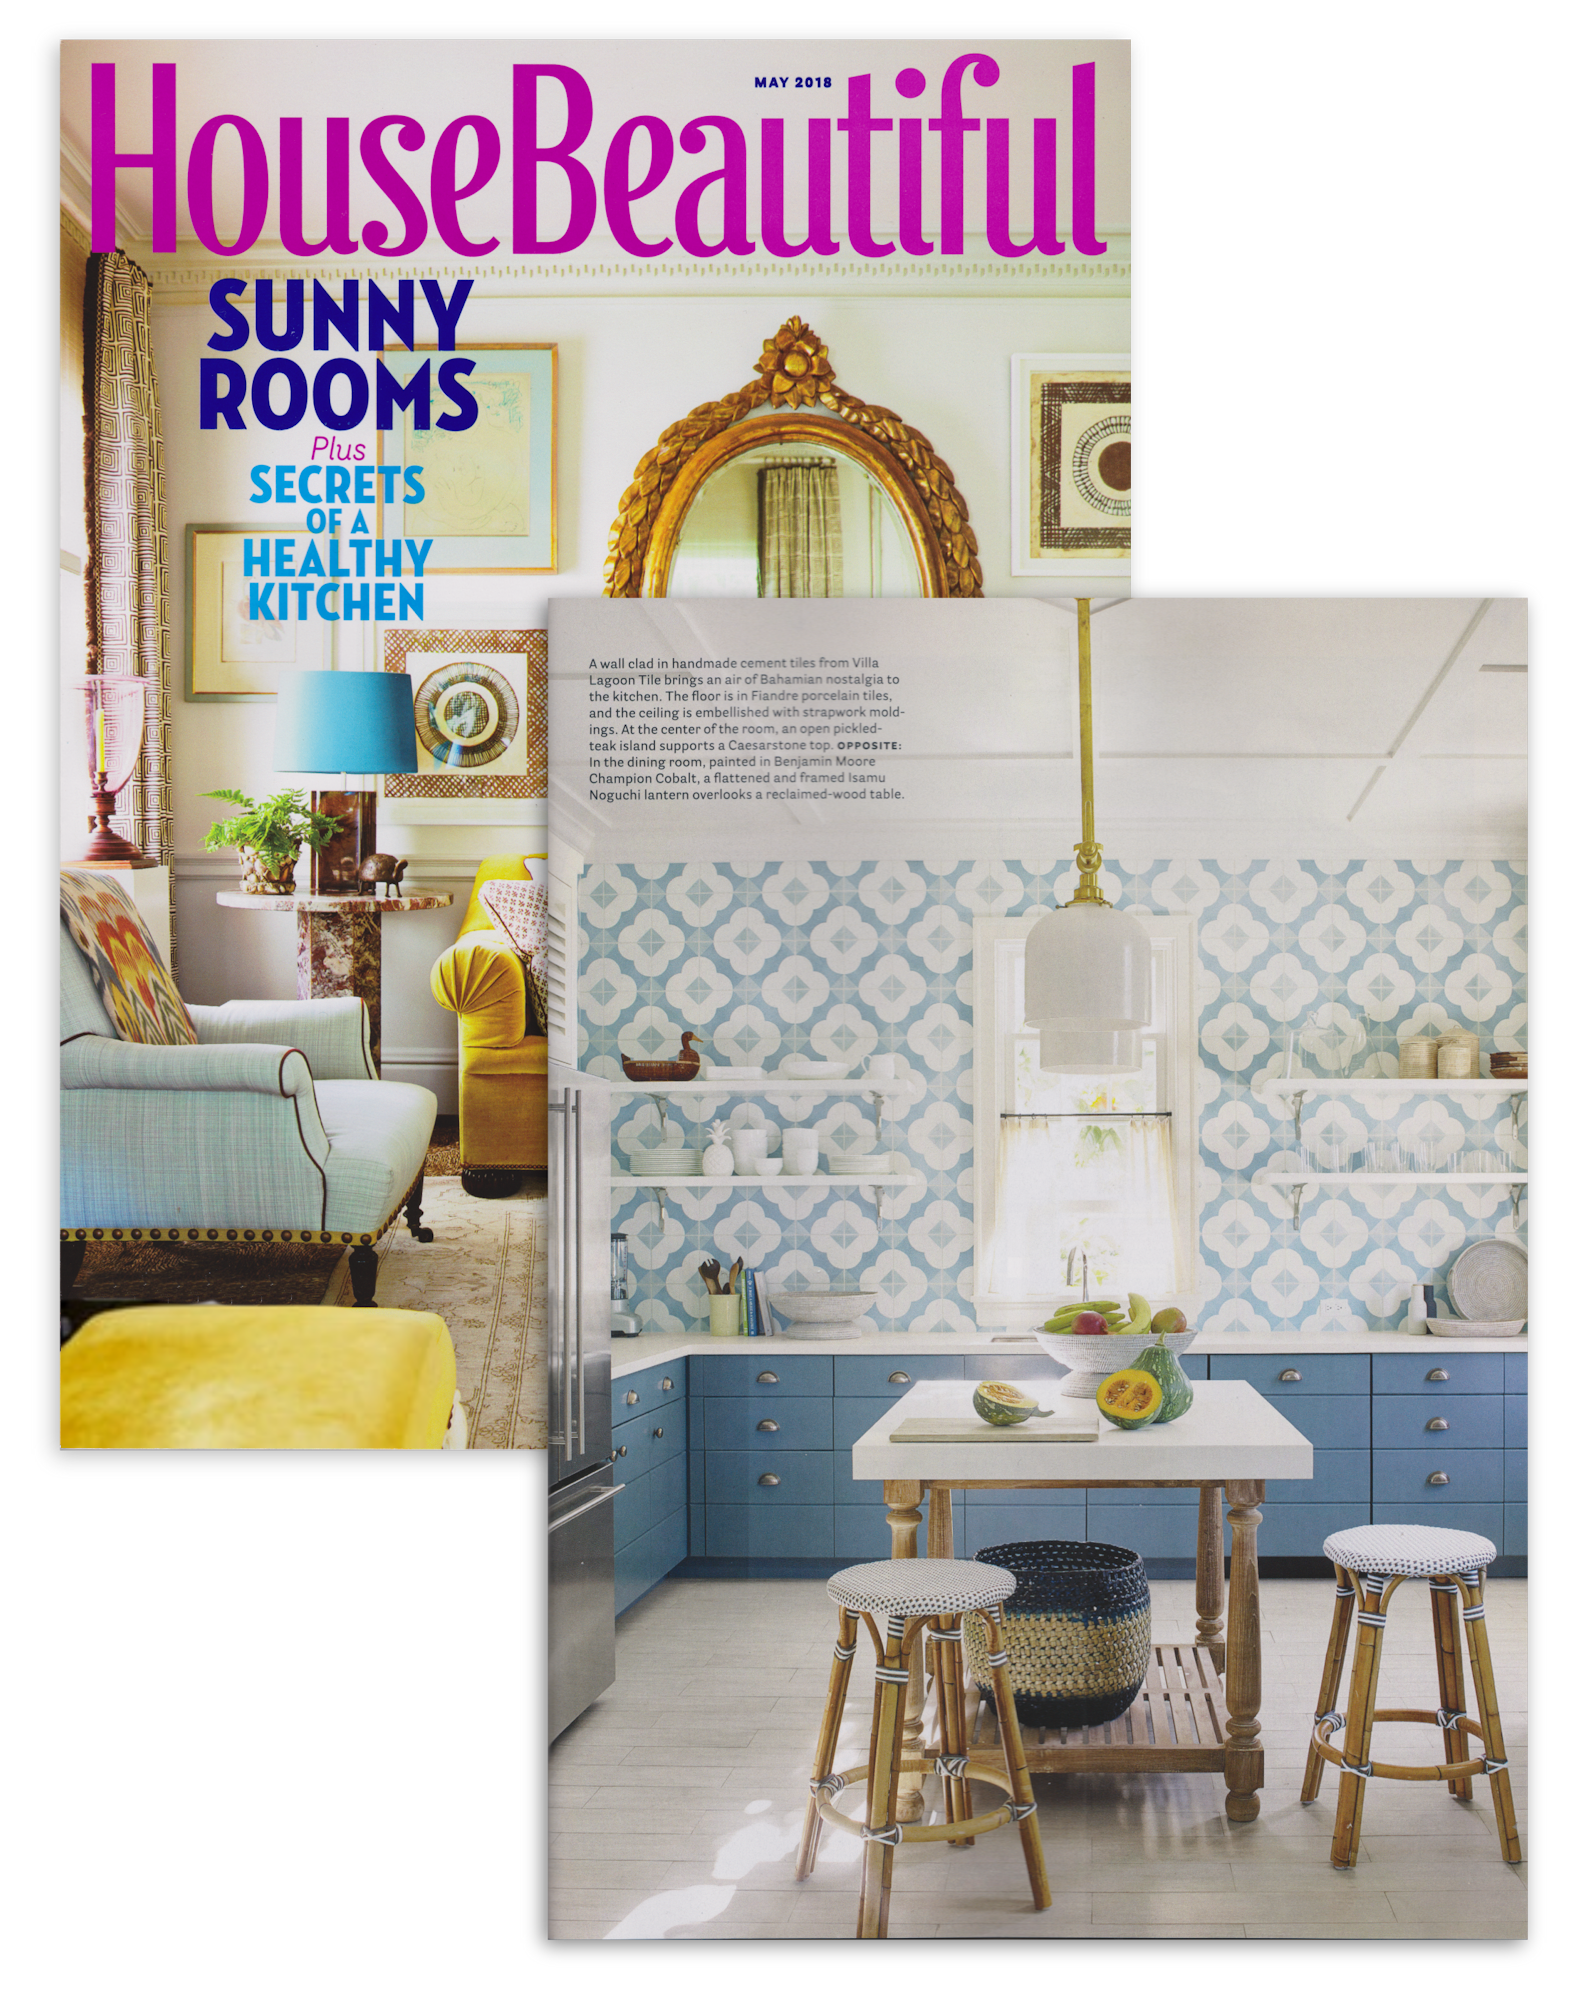 House Beautiful Magazine Cover and interior page from May 2018 featuring Tom Scheerer